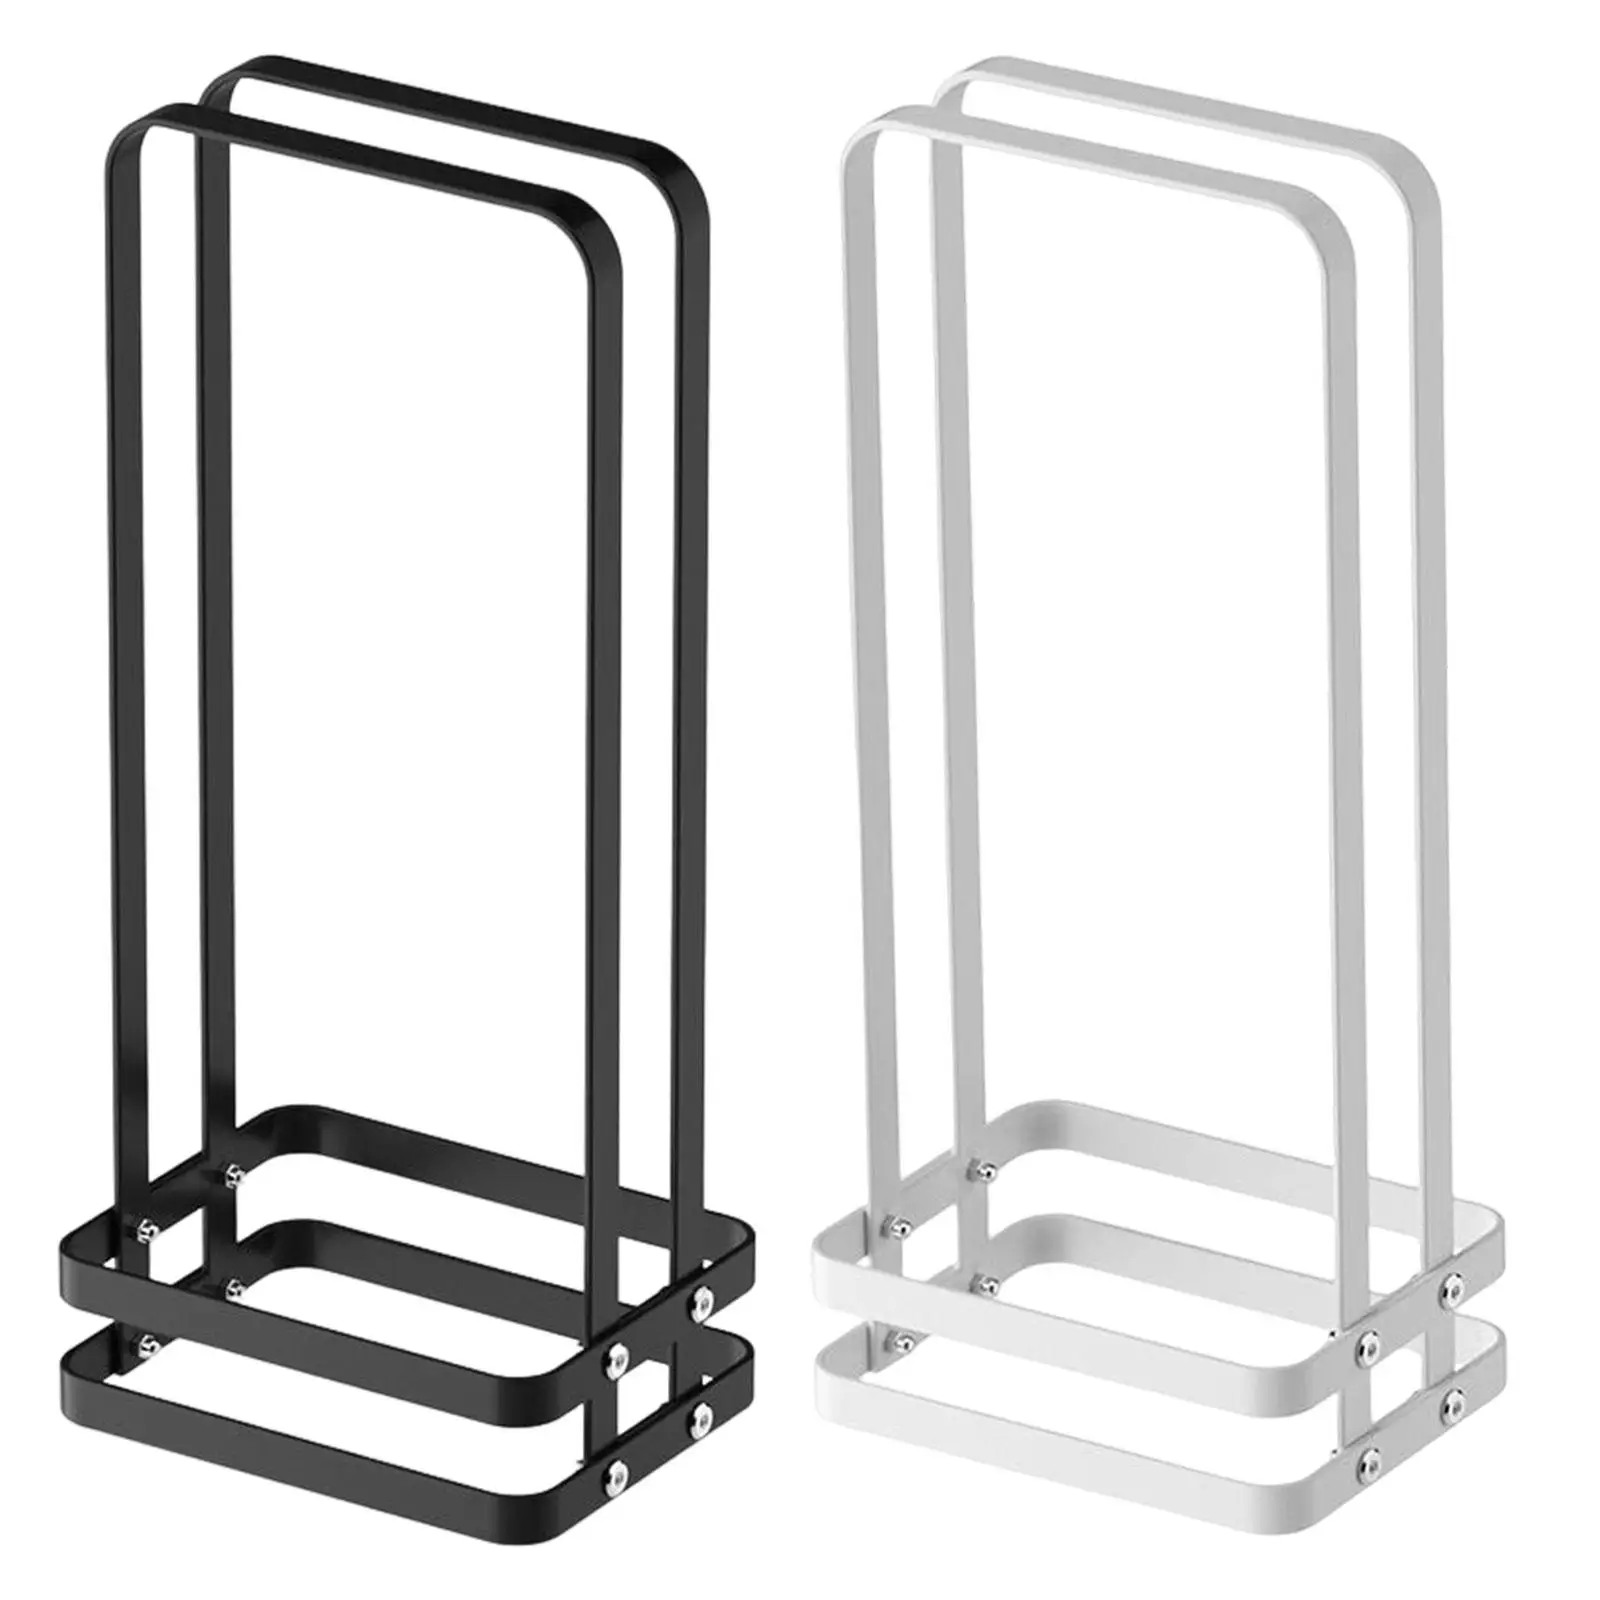 Coat Hanger Stand Towel Shelf Space Saving Metal Clothes Hanger Holder for Closet Dry Cleaning Room Laundry Room Adult or Child